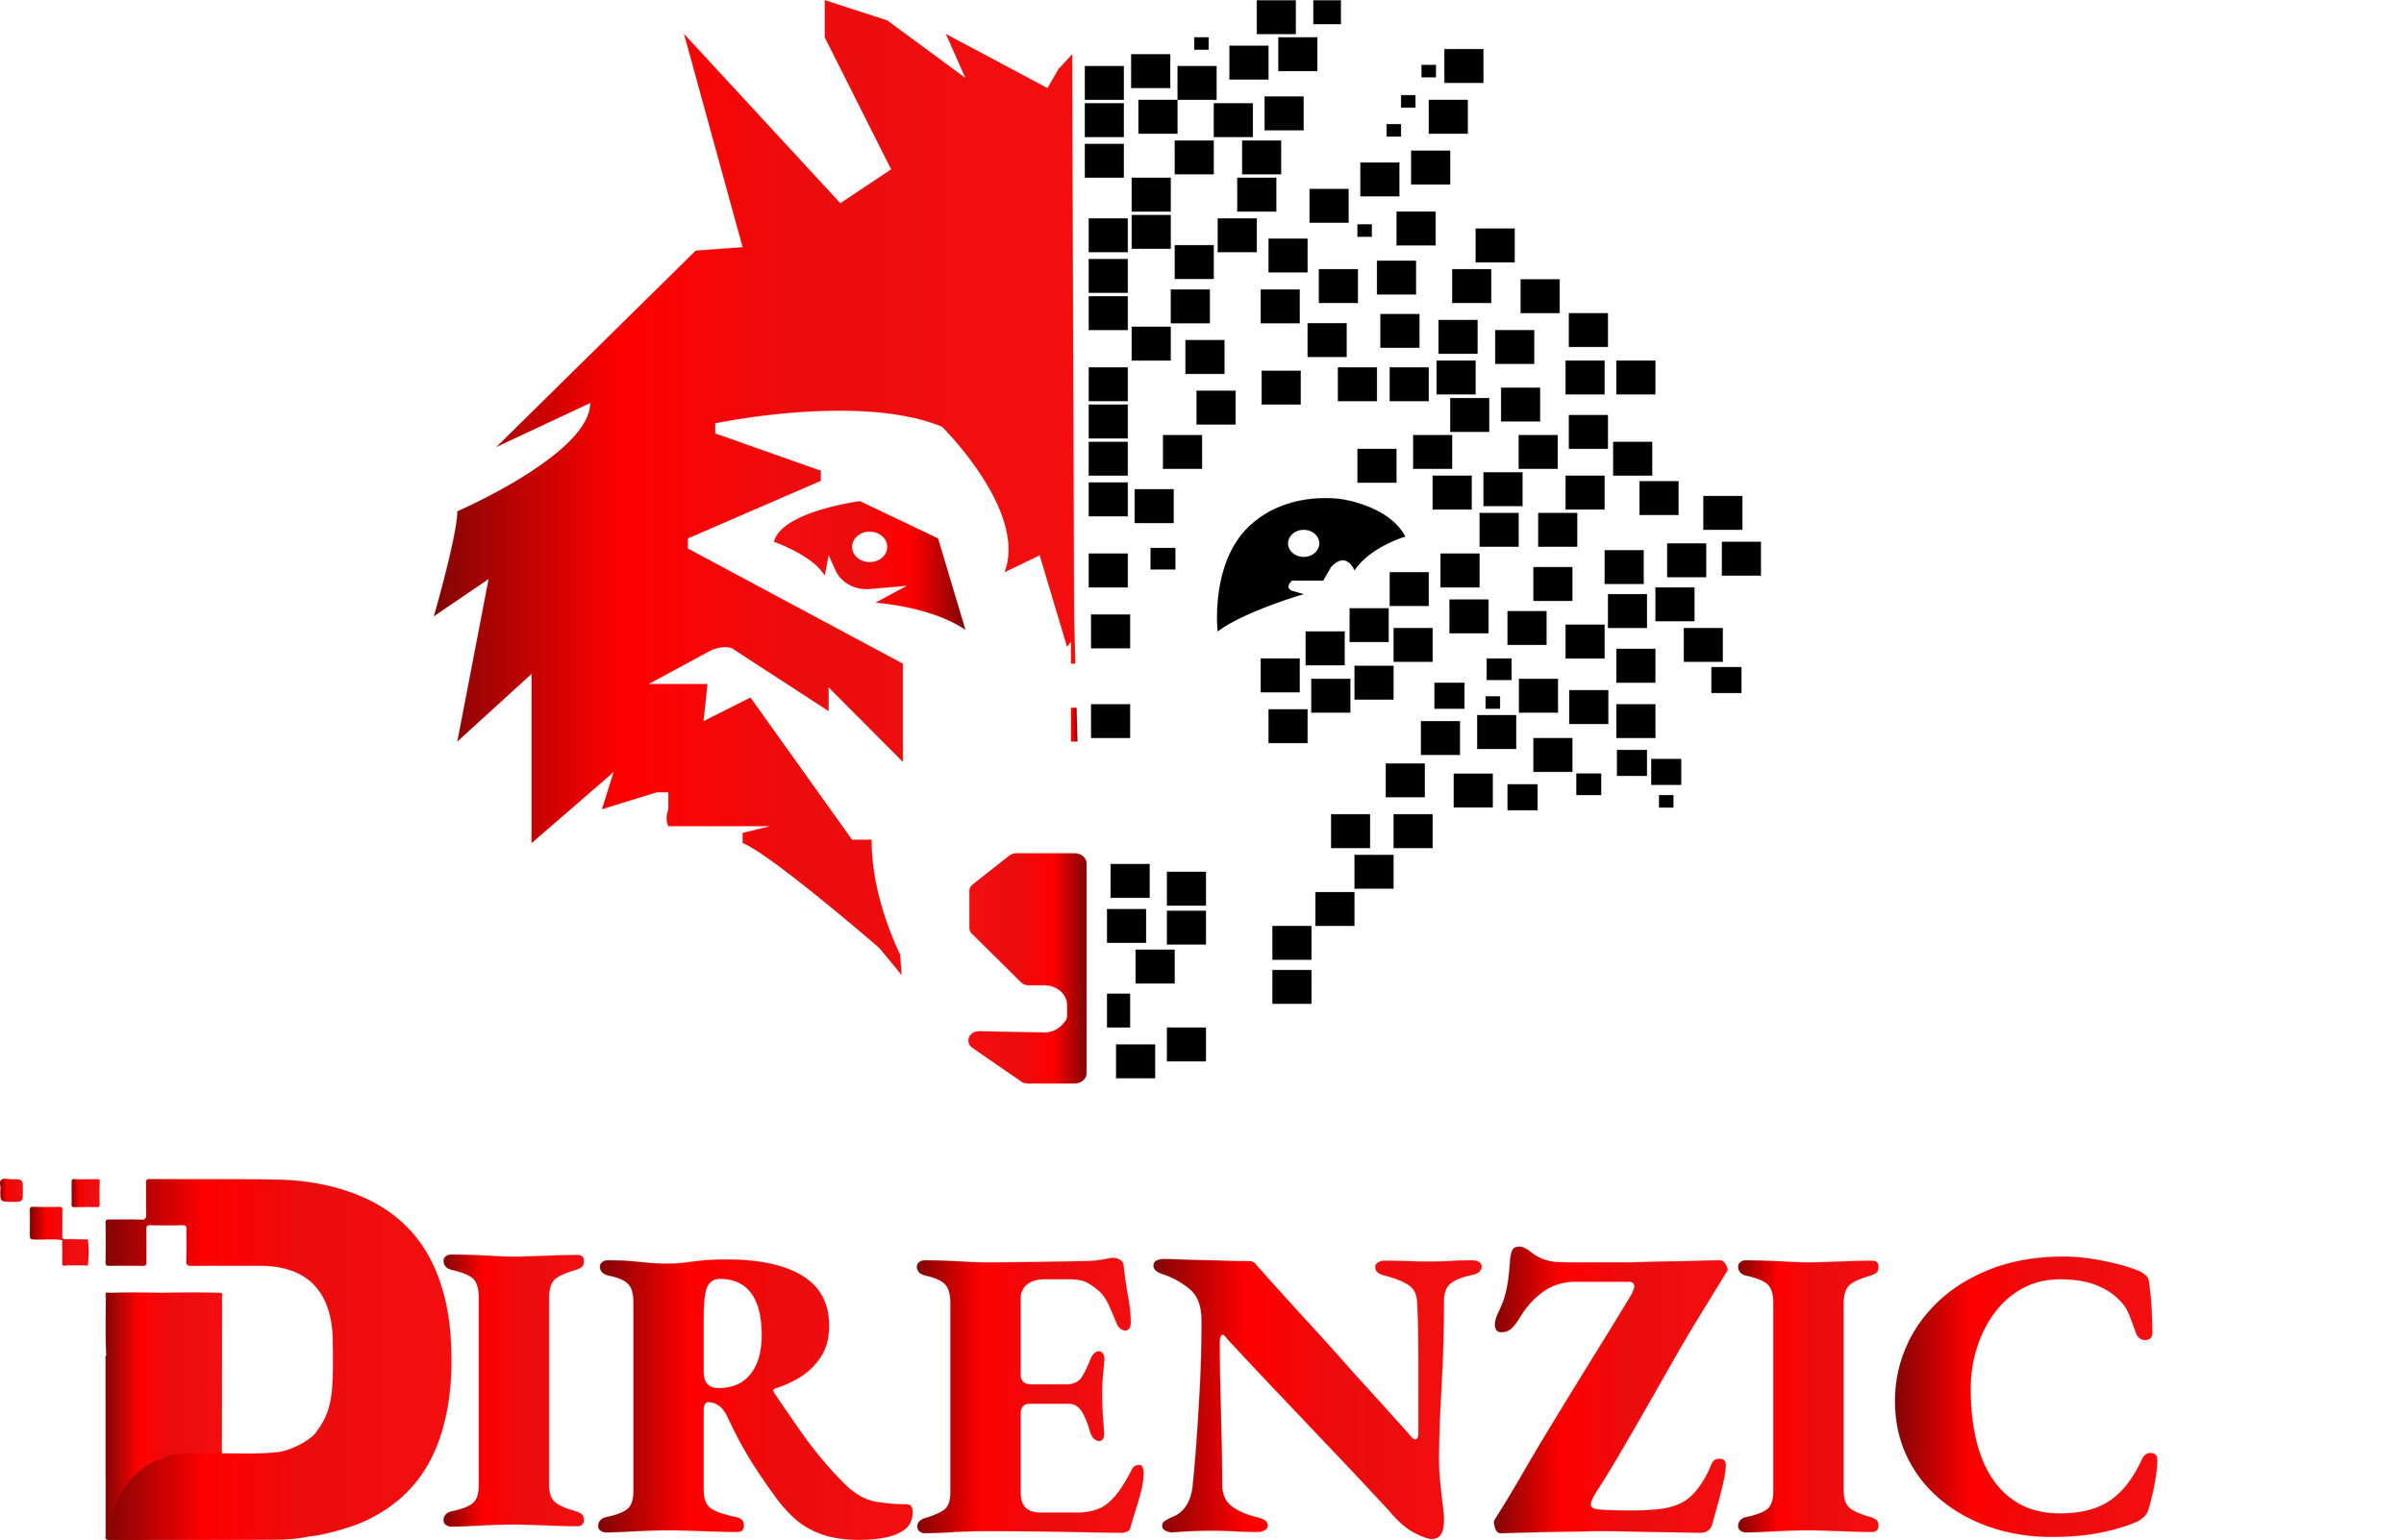 Direnzic logo of the word D-I-R-E-N-Z-I-C in red with a part of the letter "D" breaking off into pixelation. Click on image to visit their website: direnzic.com